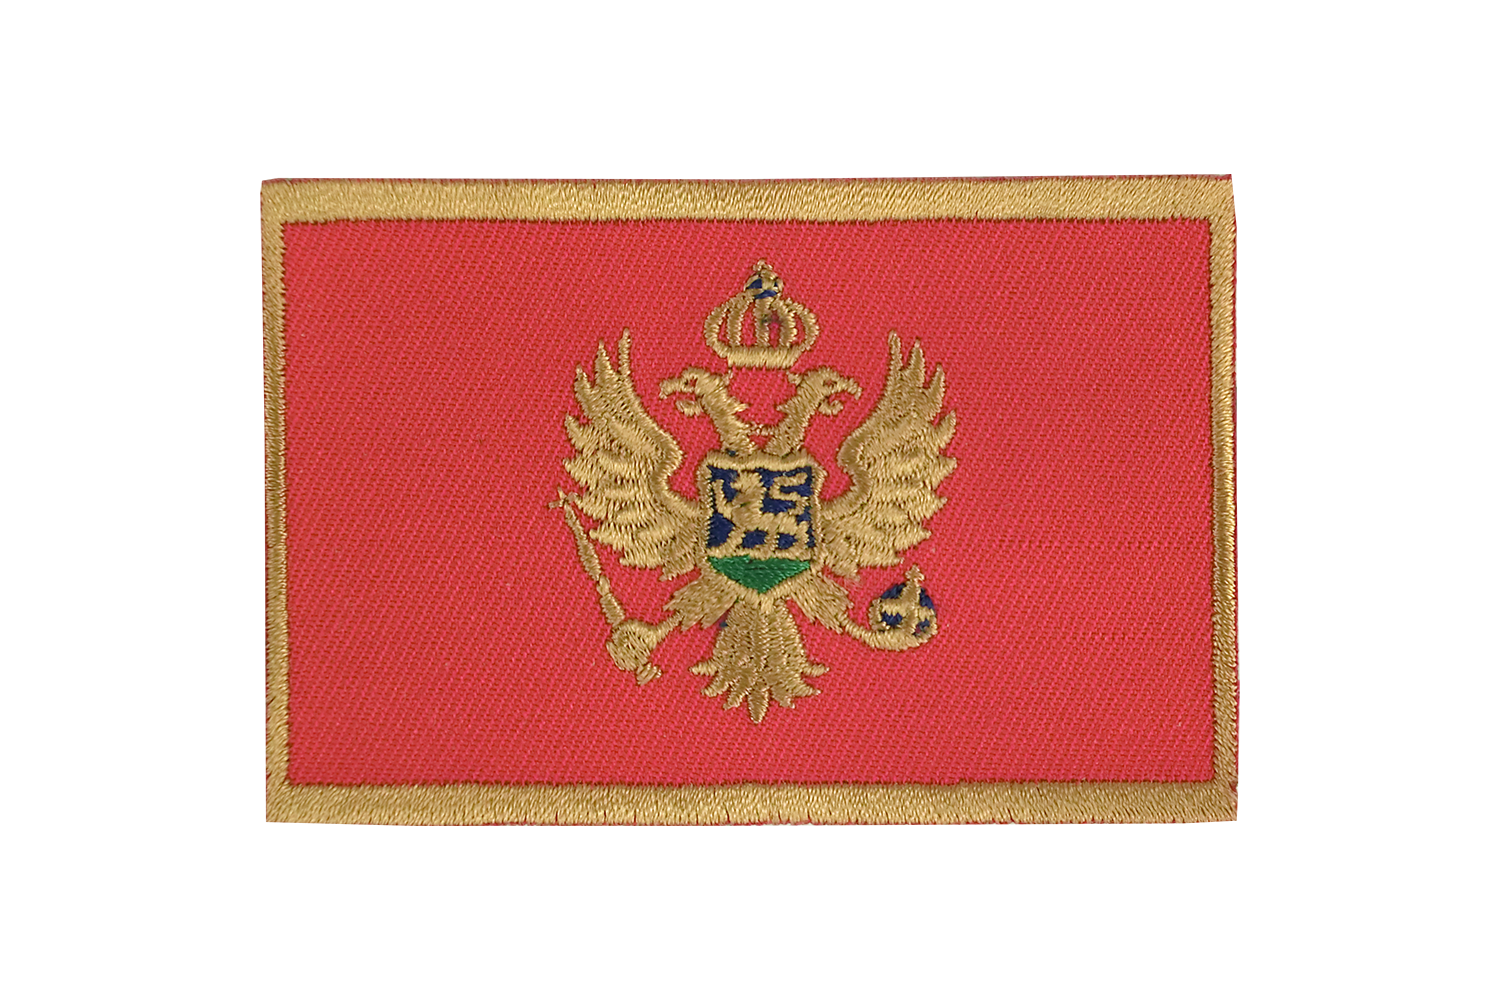 A Red And Gold Patch With A Double Eagle And A Crown